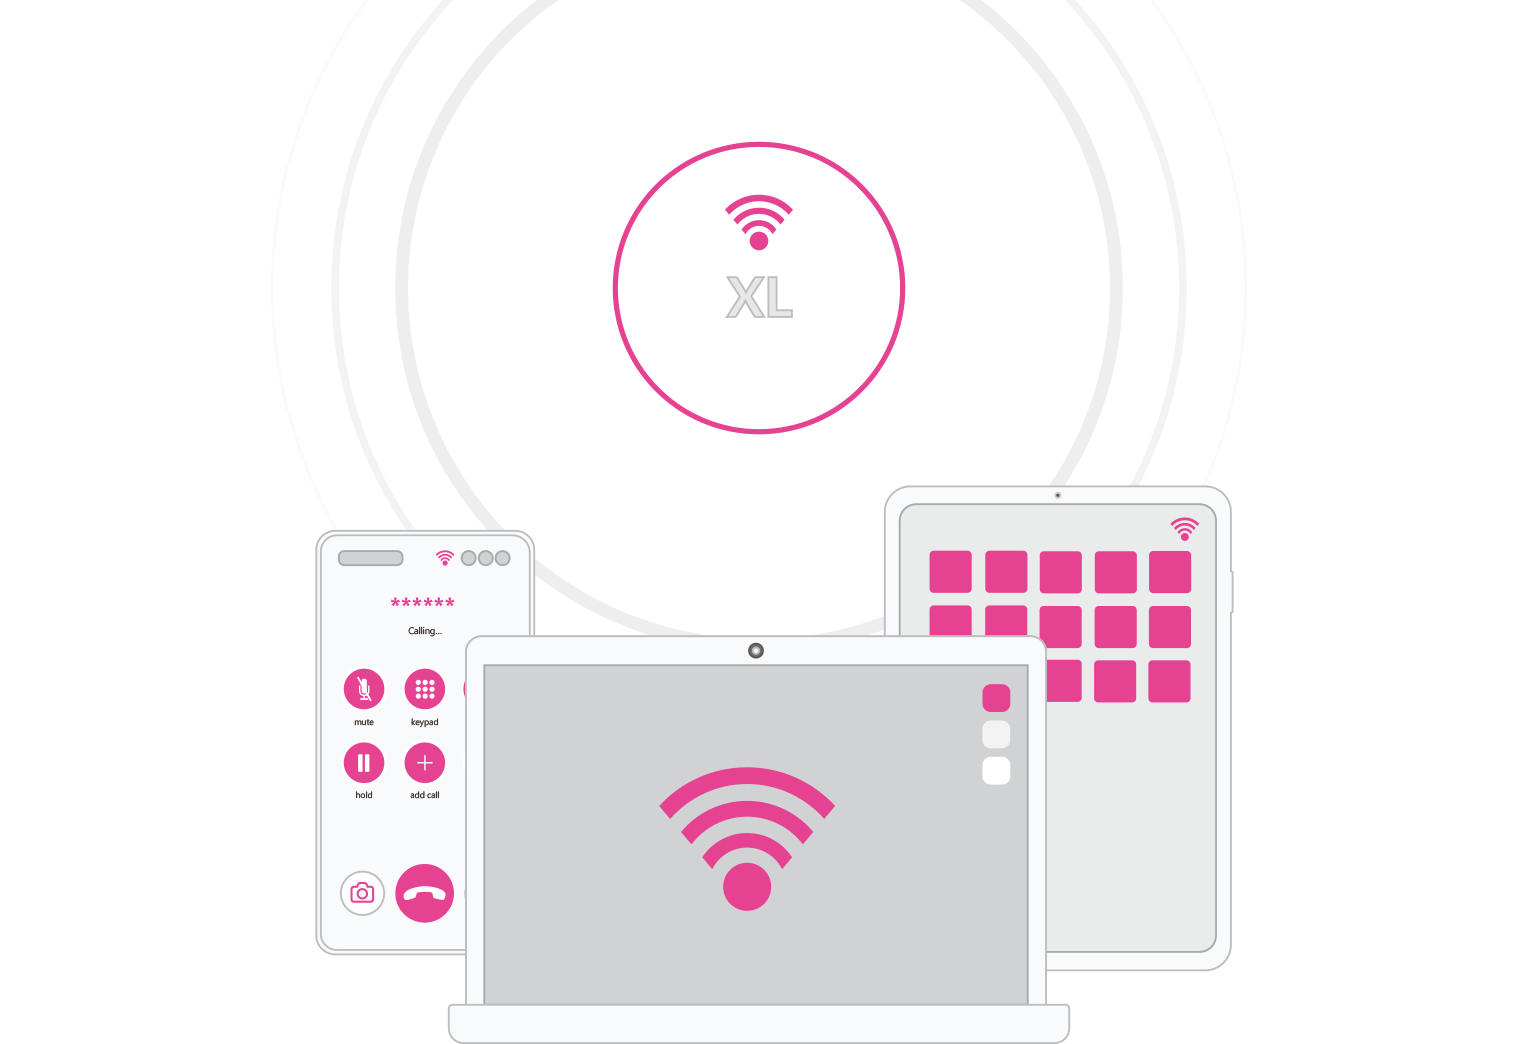 How To Extend WiFi Range and Network Coverage